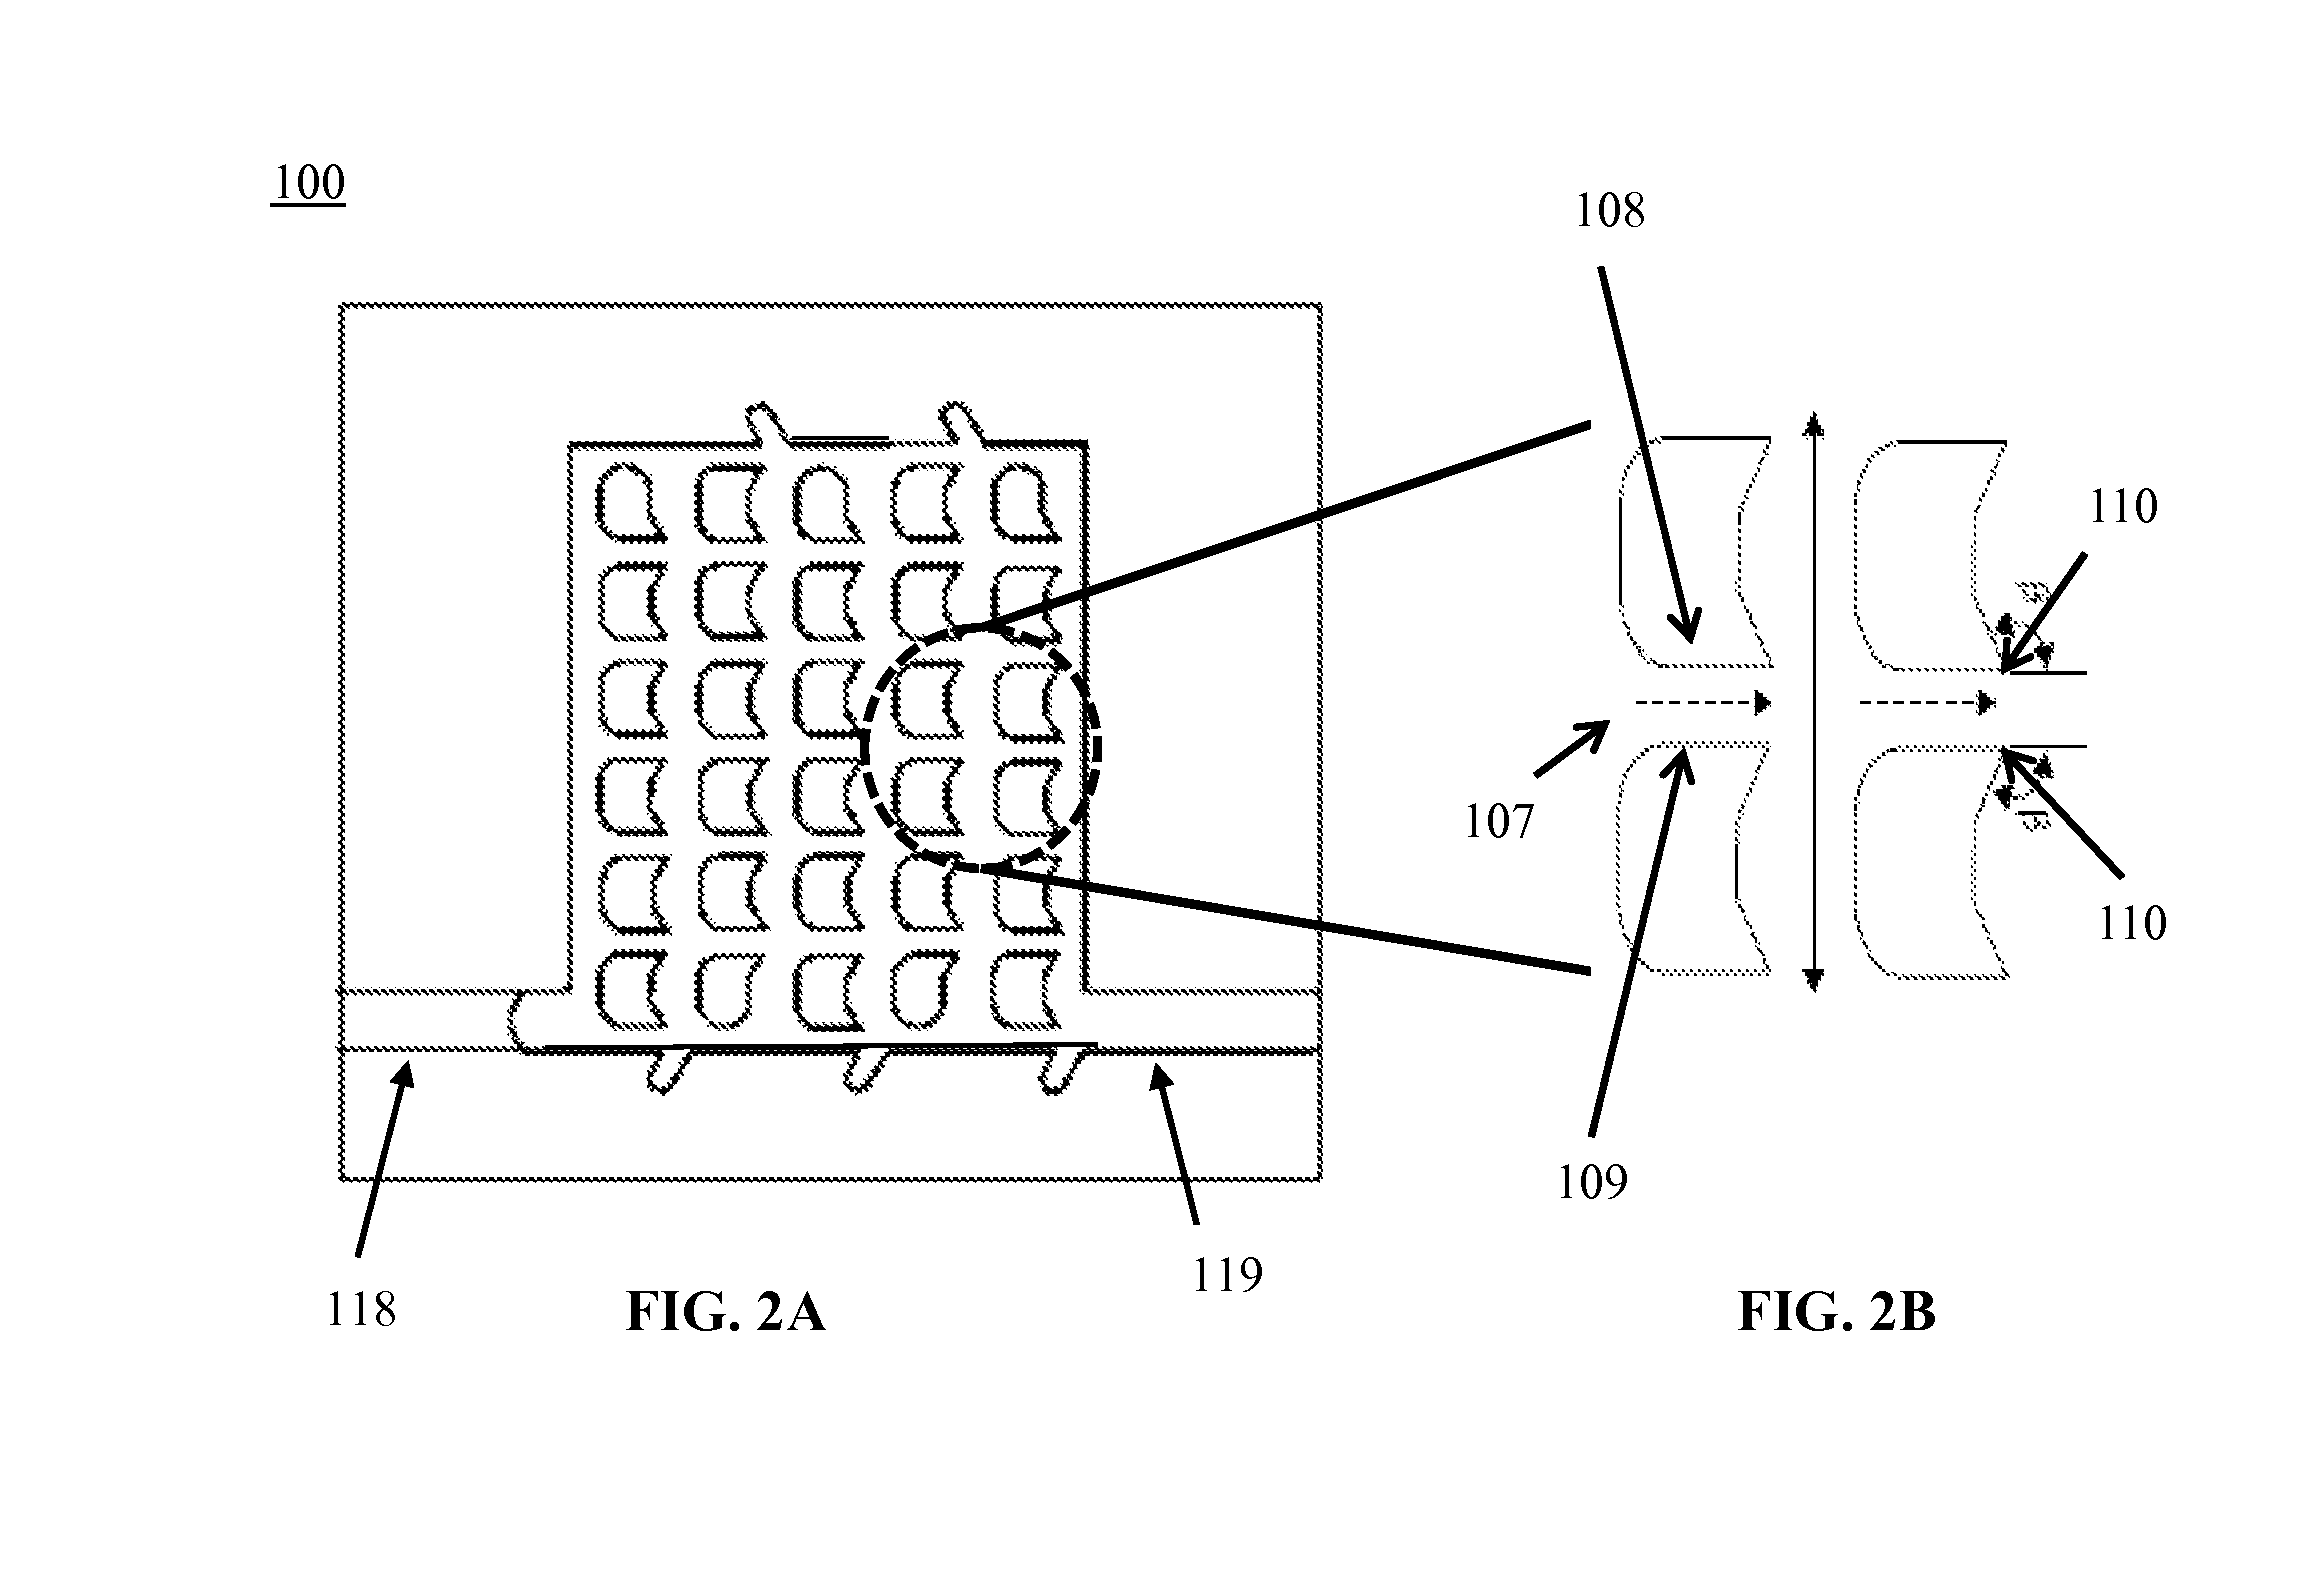 Microstructured micropillar arrays for controllable filling of a capillary pump